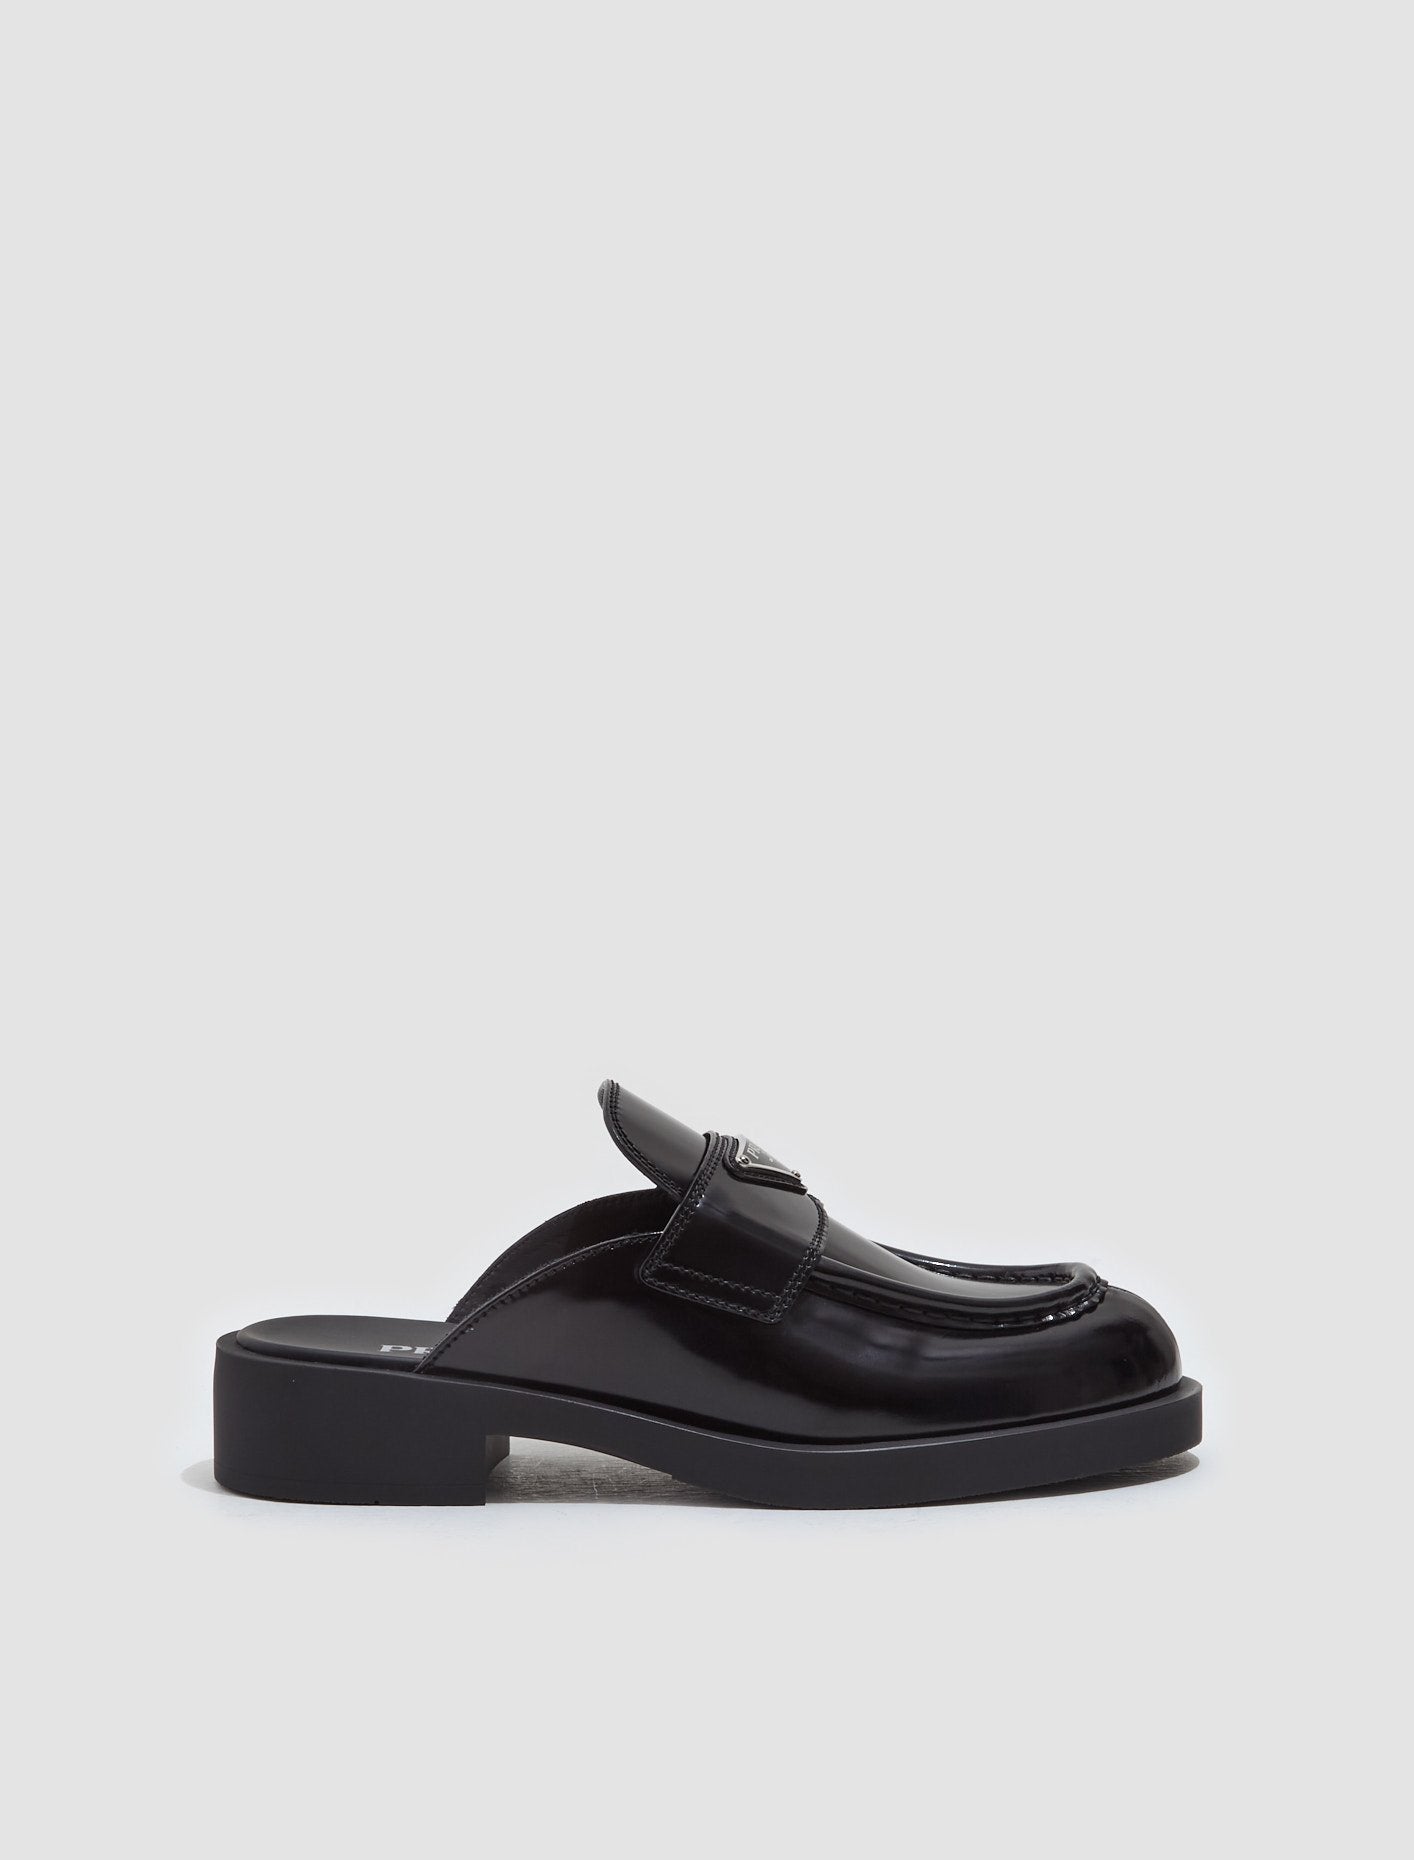 Brushed Leather Mules in Black